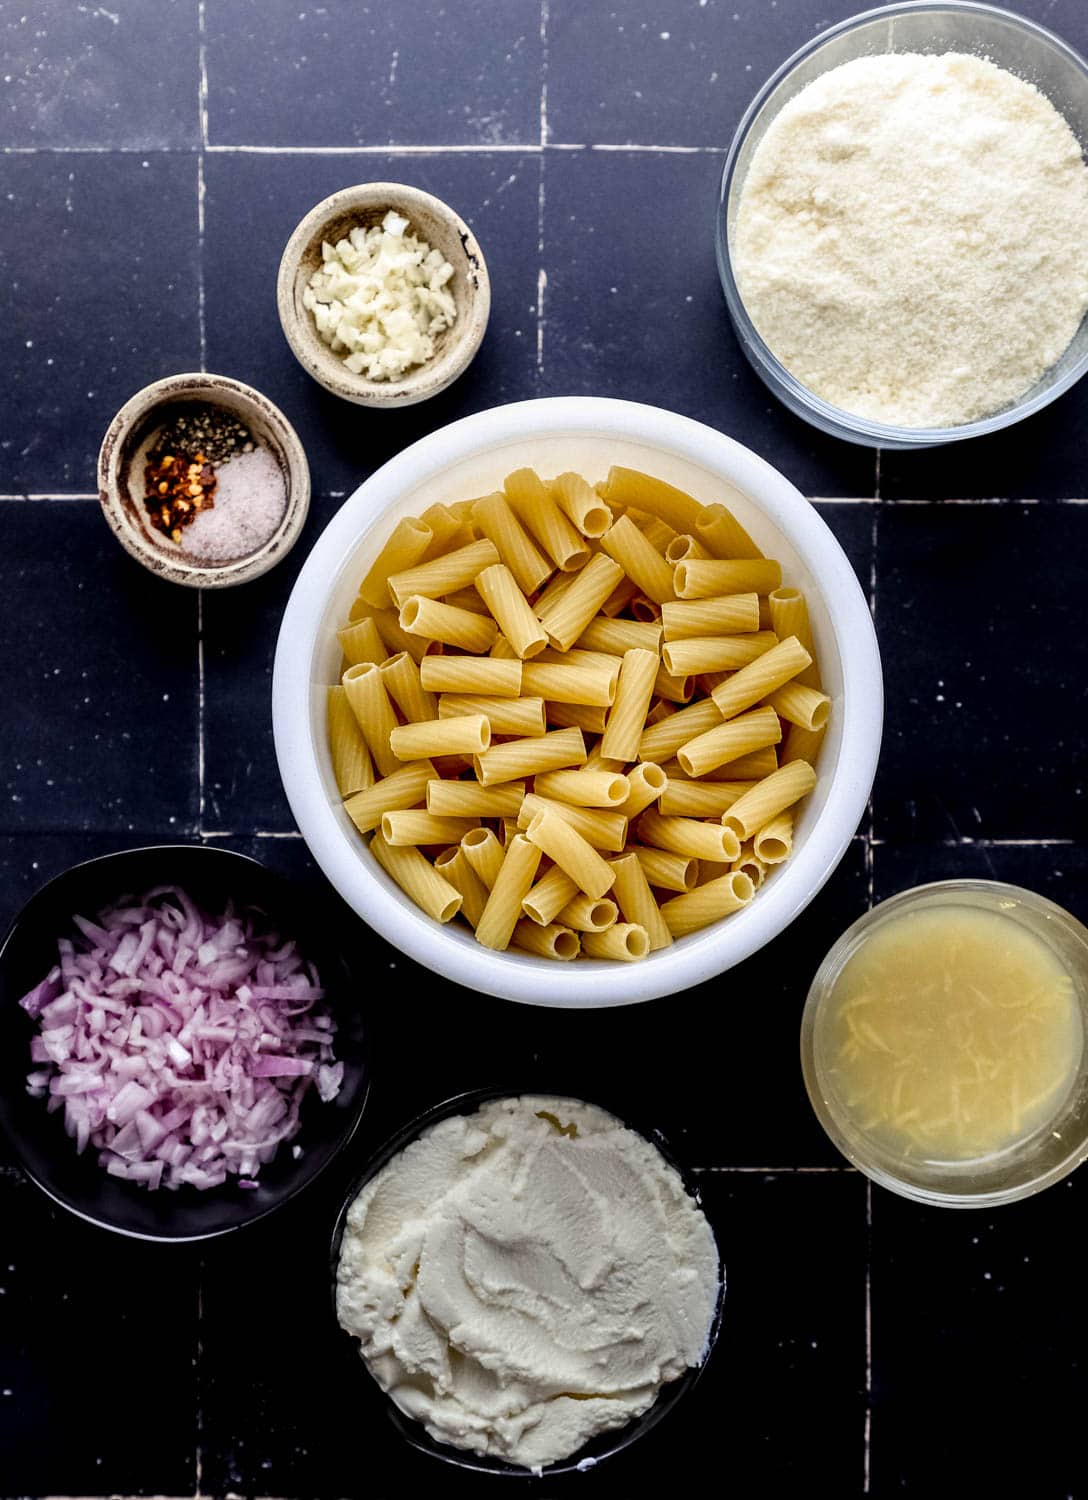 Overhead view of ingredients needed to make ricotta pasta in separate bowls on black tile surface. 